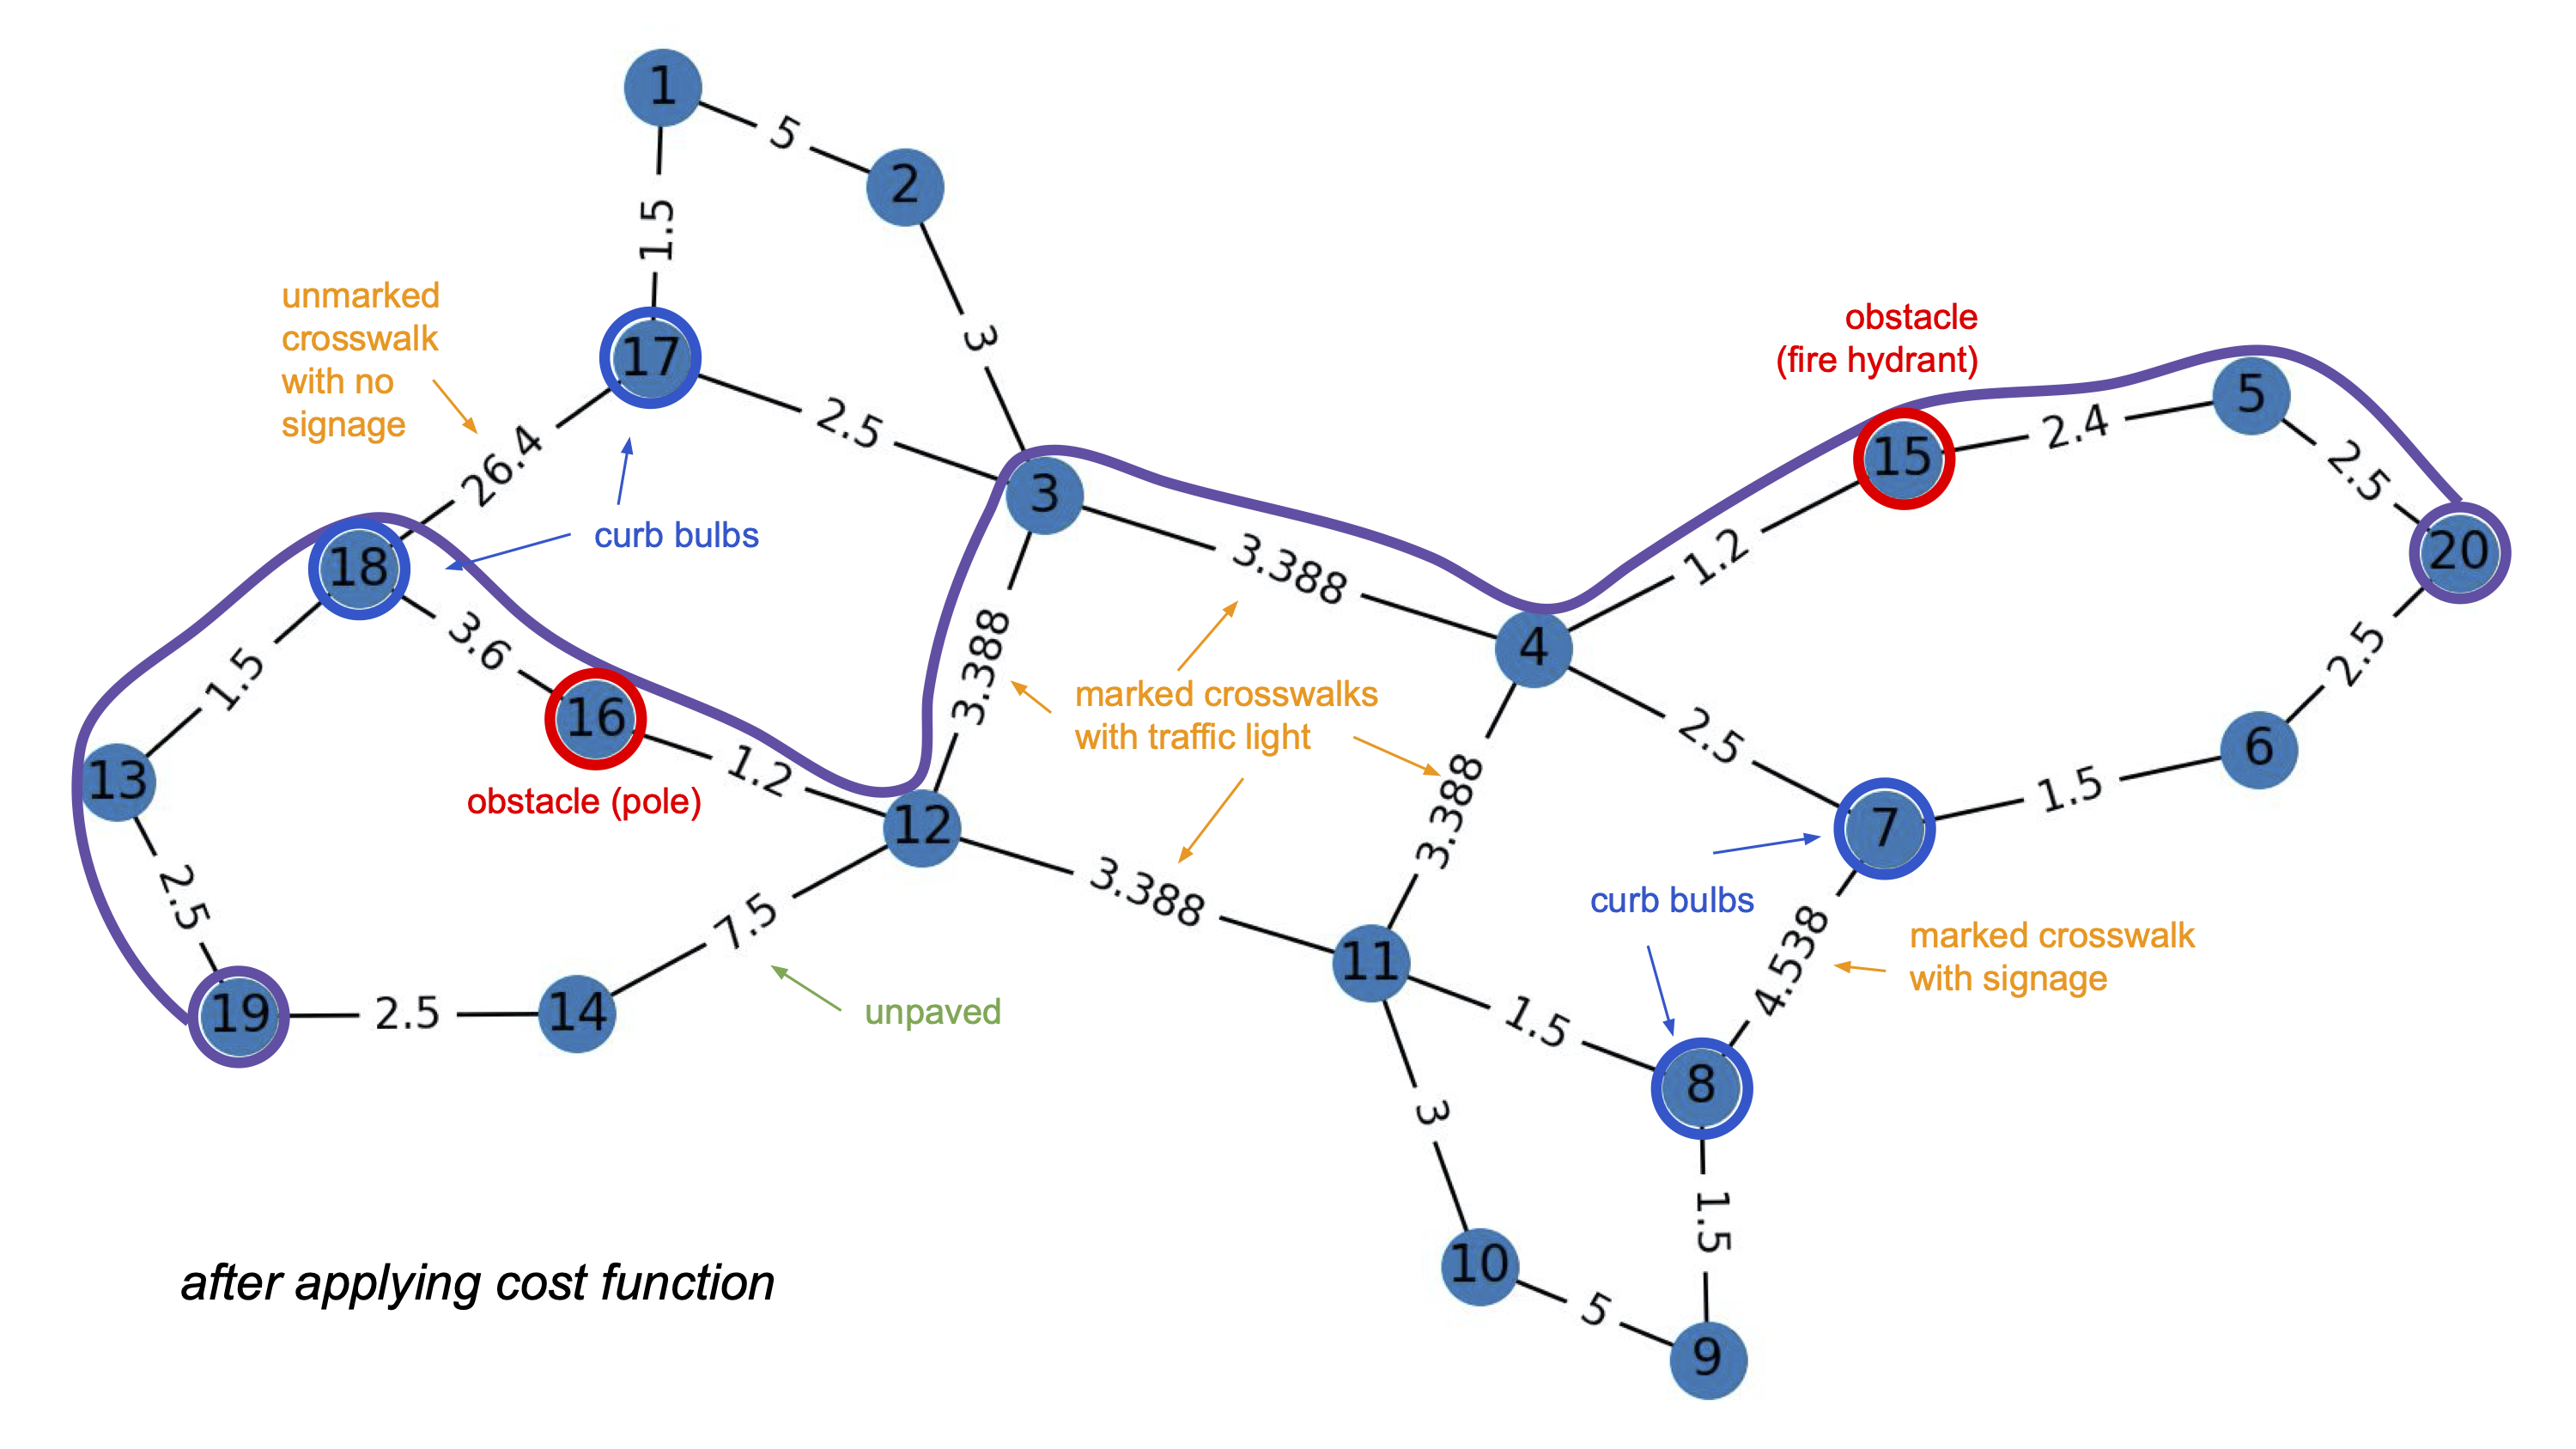 The modified network, with the same features of the built environment labeled.